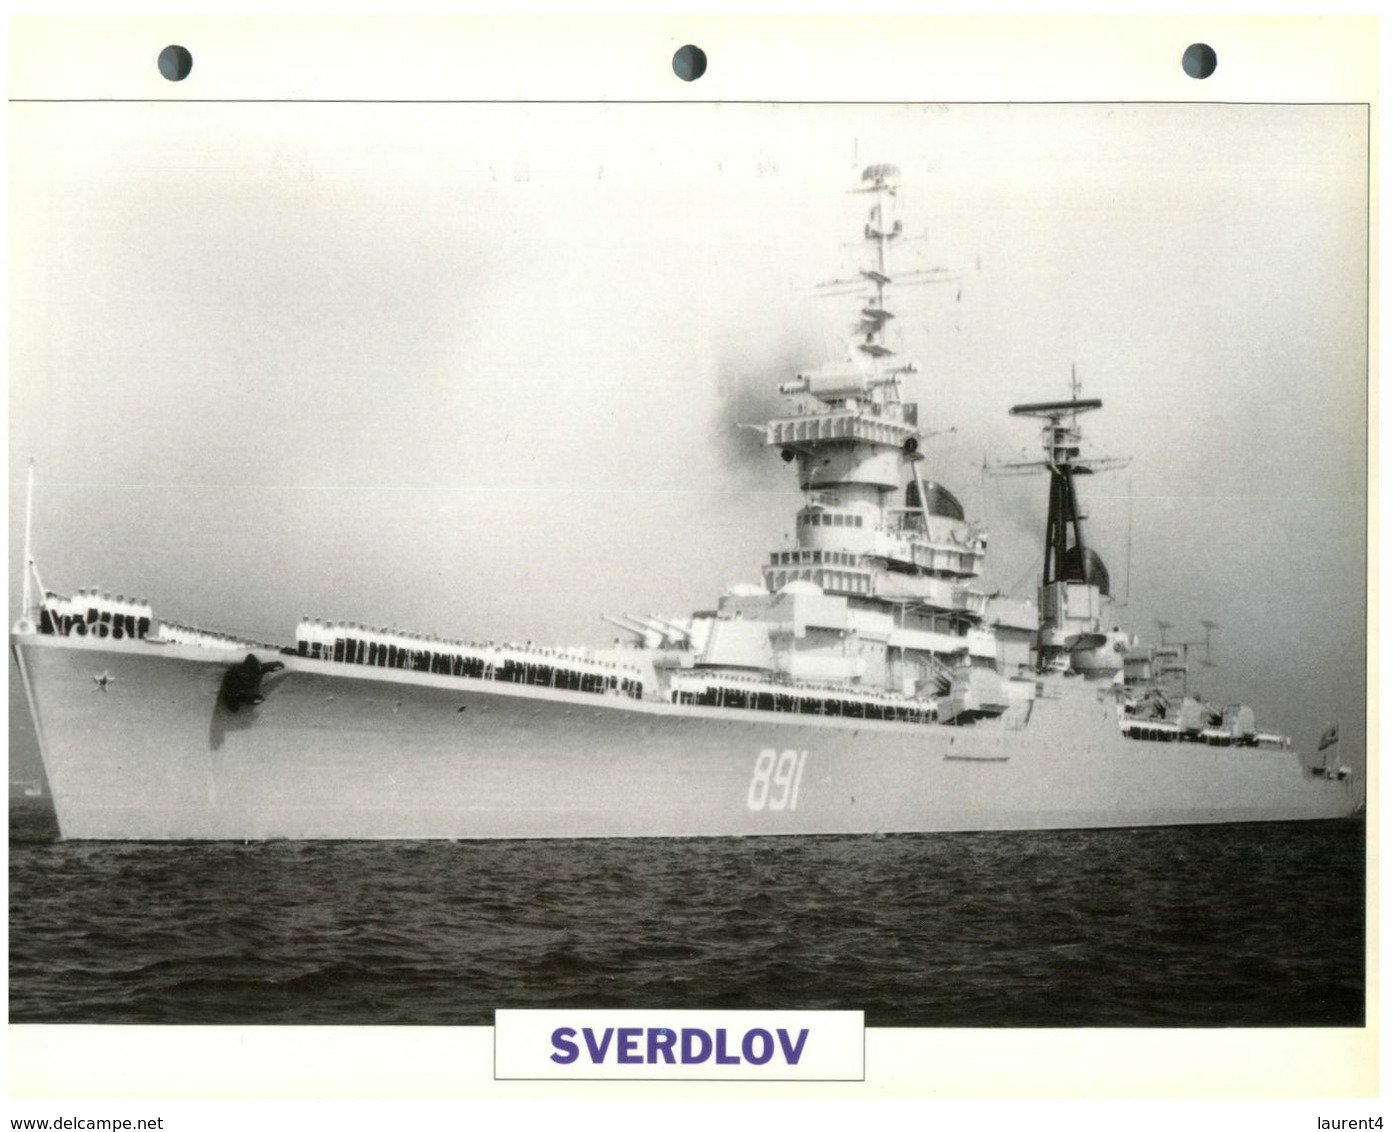 (25 X 19 Cm) (26-08-2020) - H - Photo And Info Sheet On Warship - Russia Navy - Sverdlov (891) - Bateaux